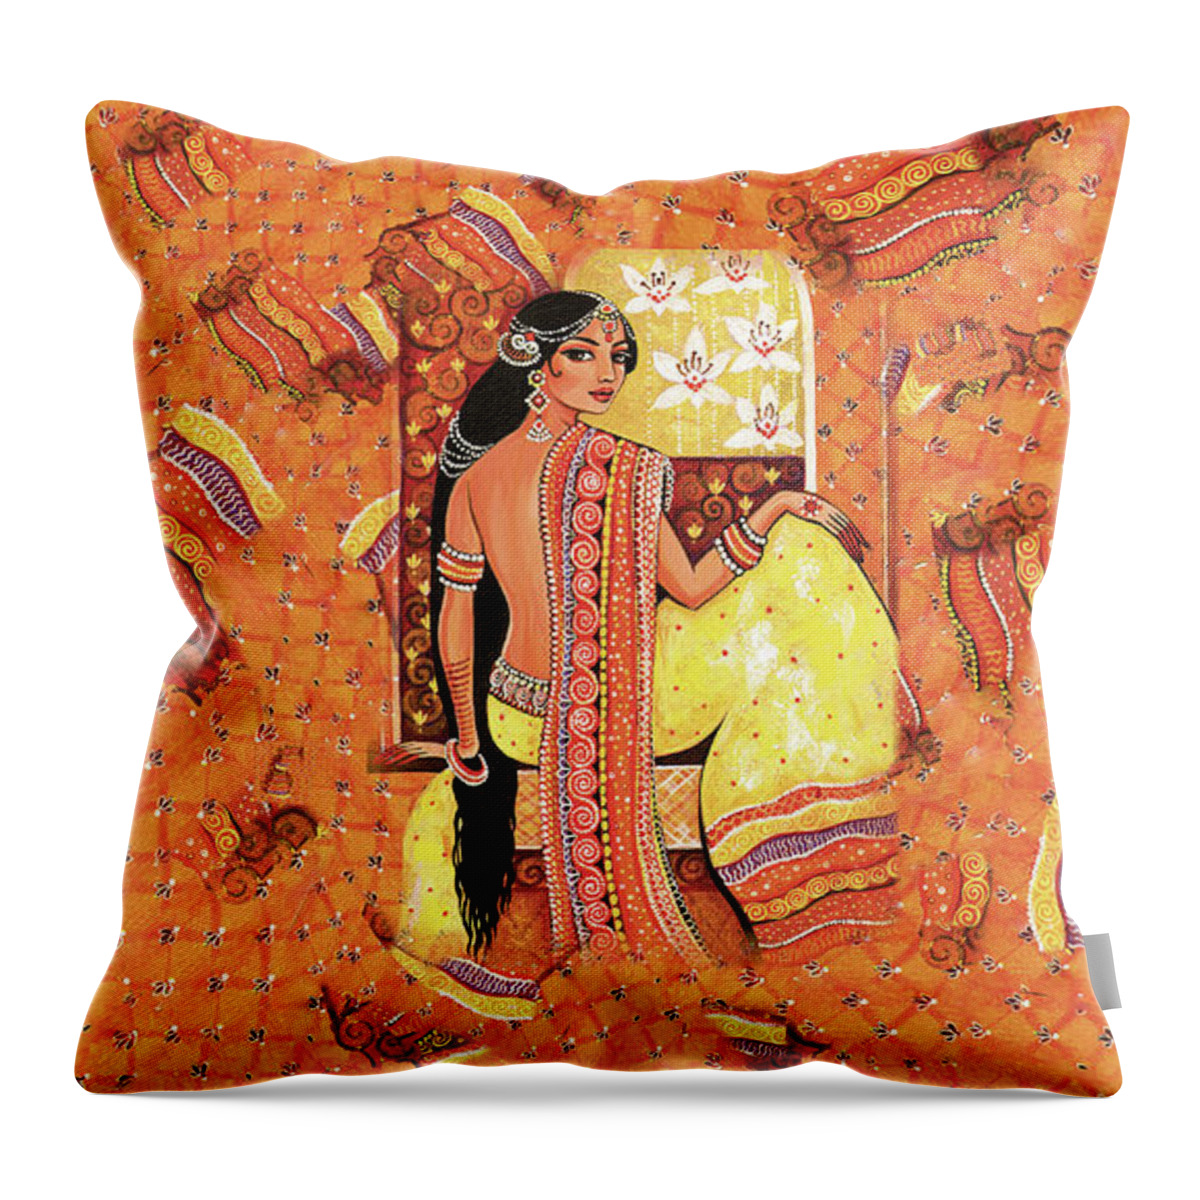 Beautiful Woman Throw Pillow featuring the painting Bharat by Eva Campbell